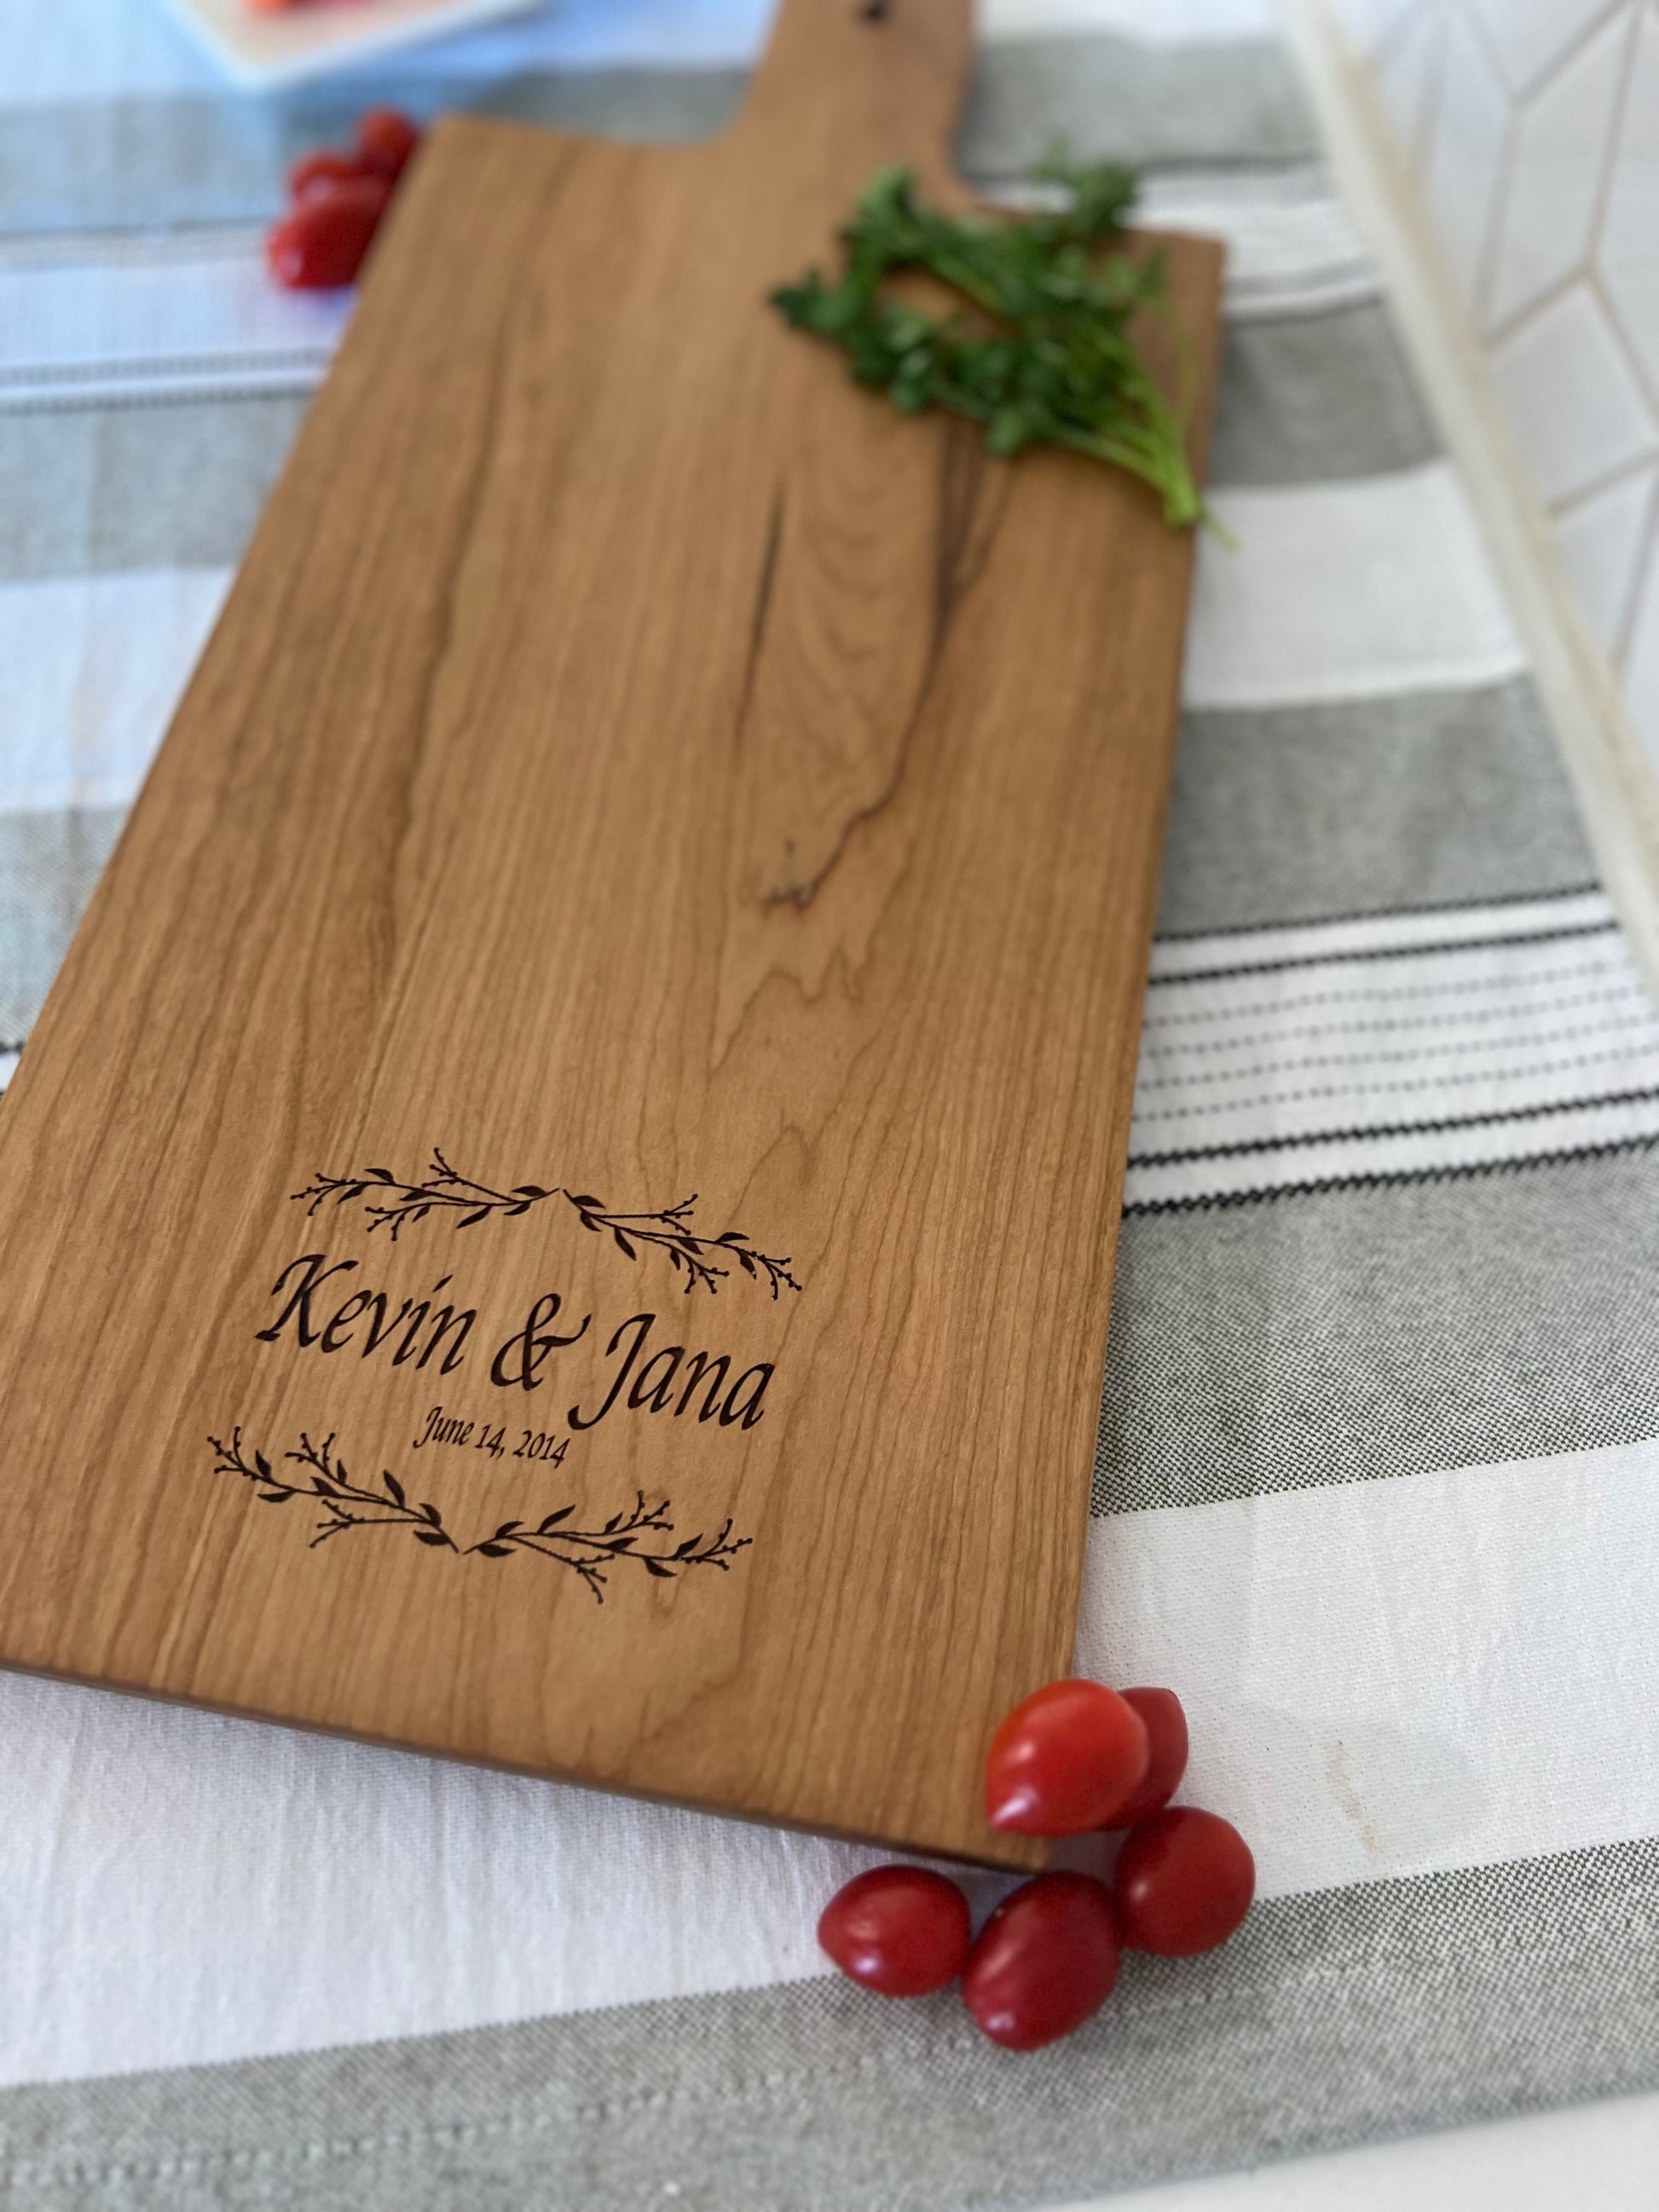 Cherry Charcuterie Board - Couples Names and Anniversary Date, close up.